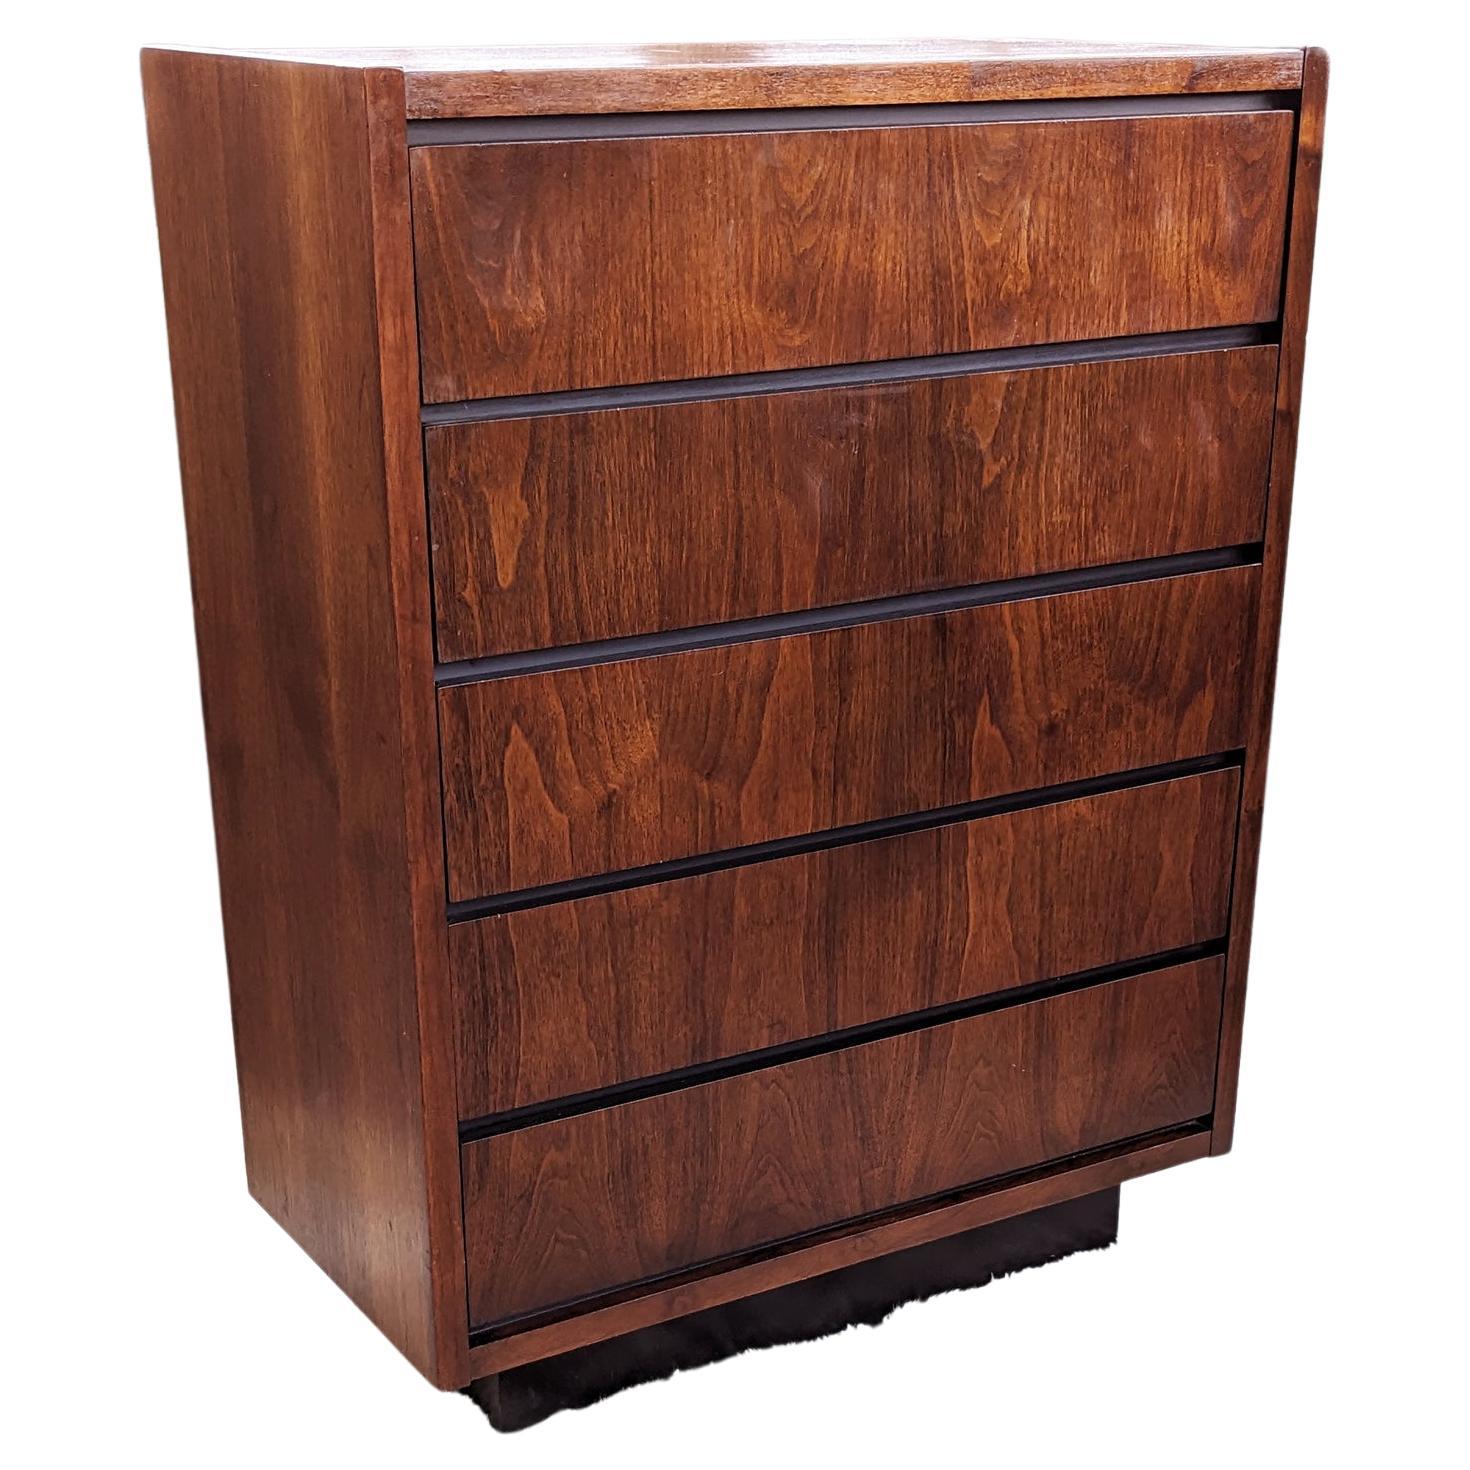 Very nice looking and functional high quality Brutalist Lane dresser. The drawers catch on rollers. In very good condition throughout.

**We have two of these gorgeous dressers available-- The other one is listed here separately.  They make a